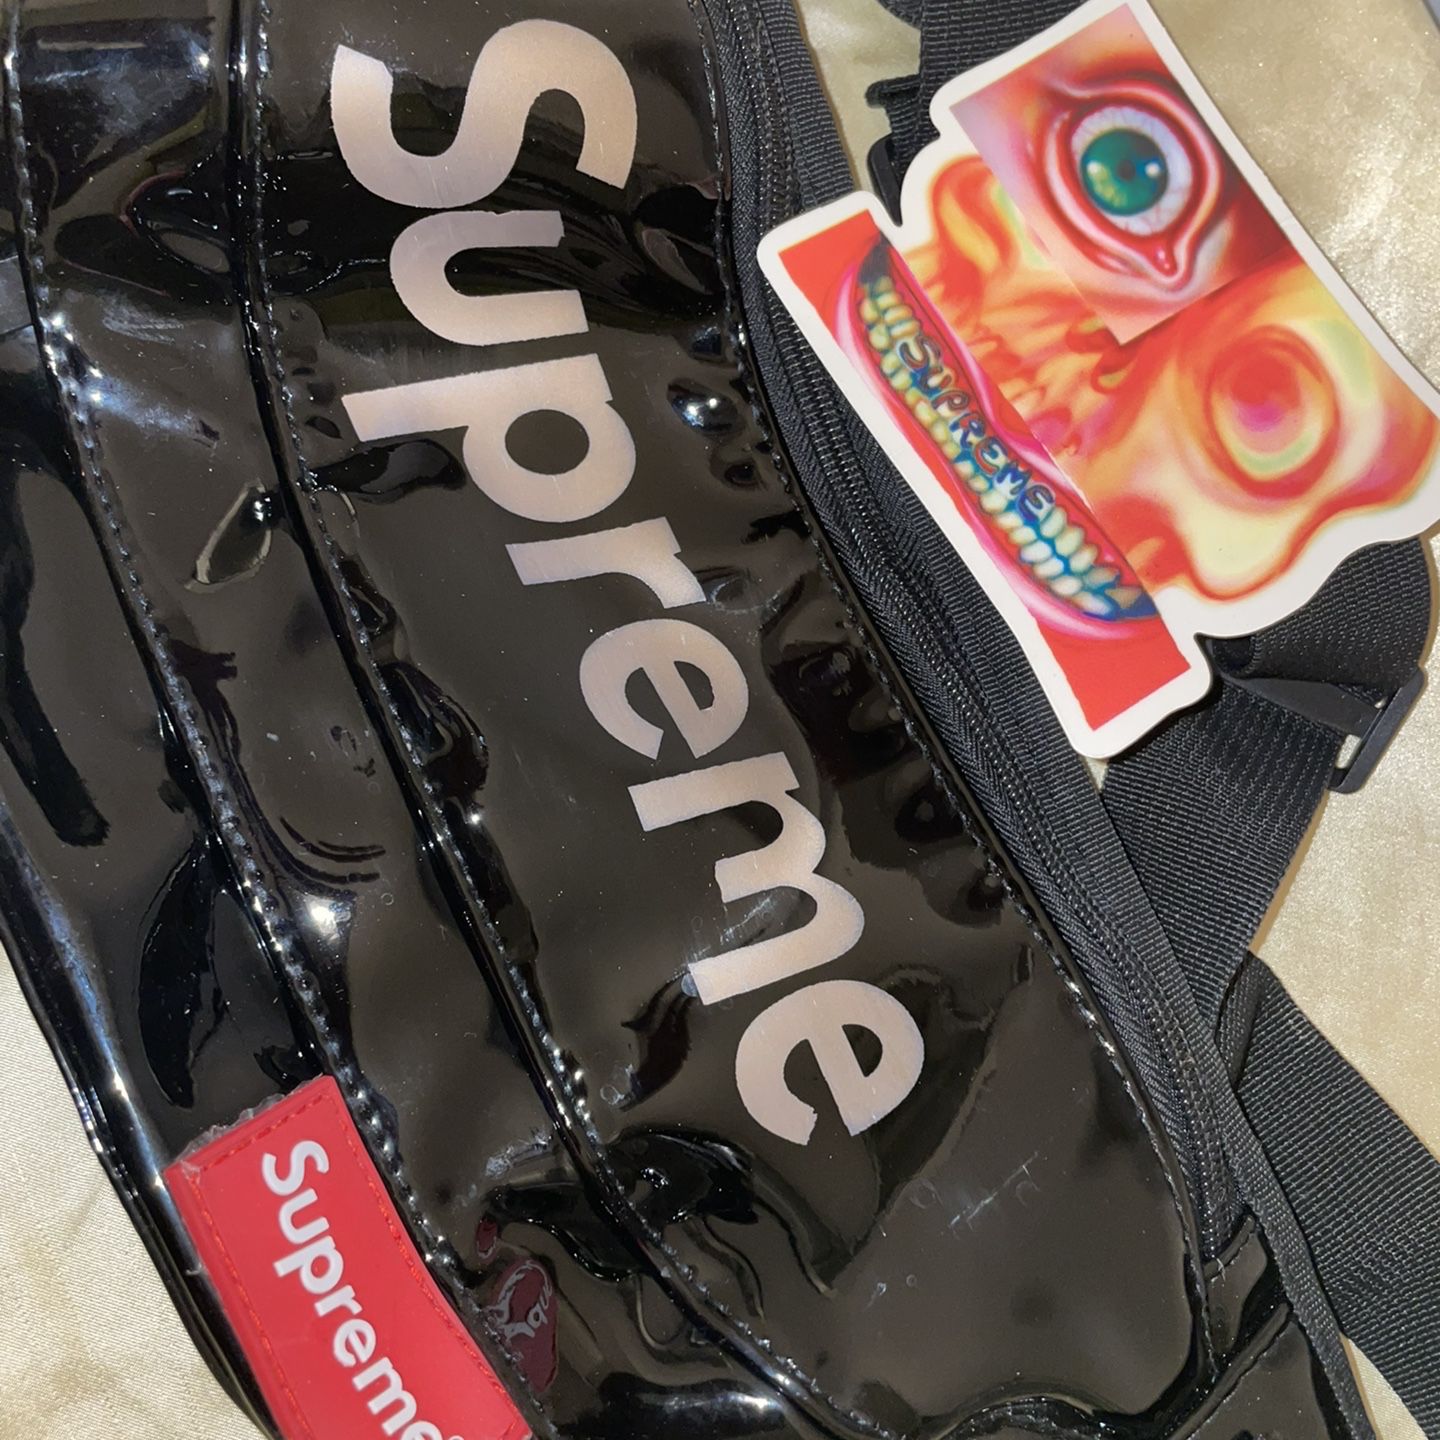 supreme fanny pack for Sale in Fort Bliss, TX - OfferUp